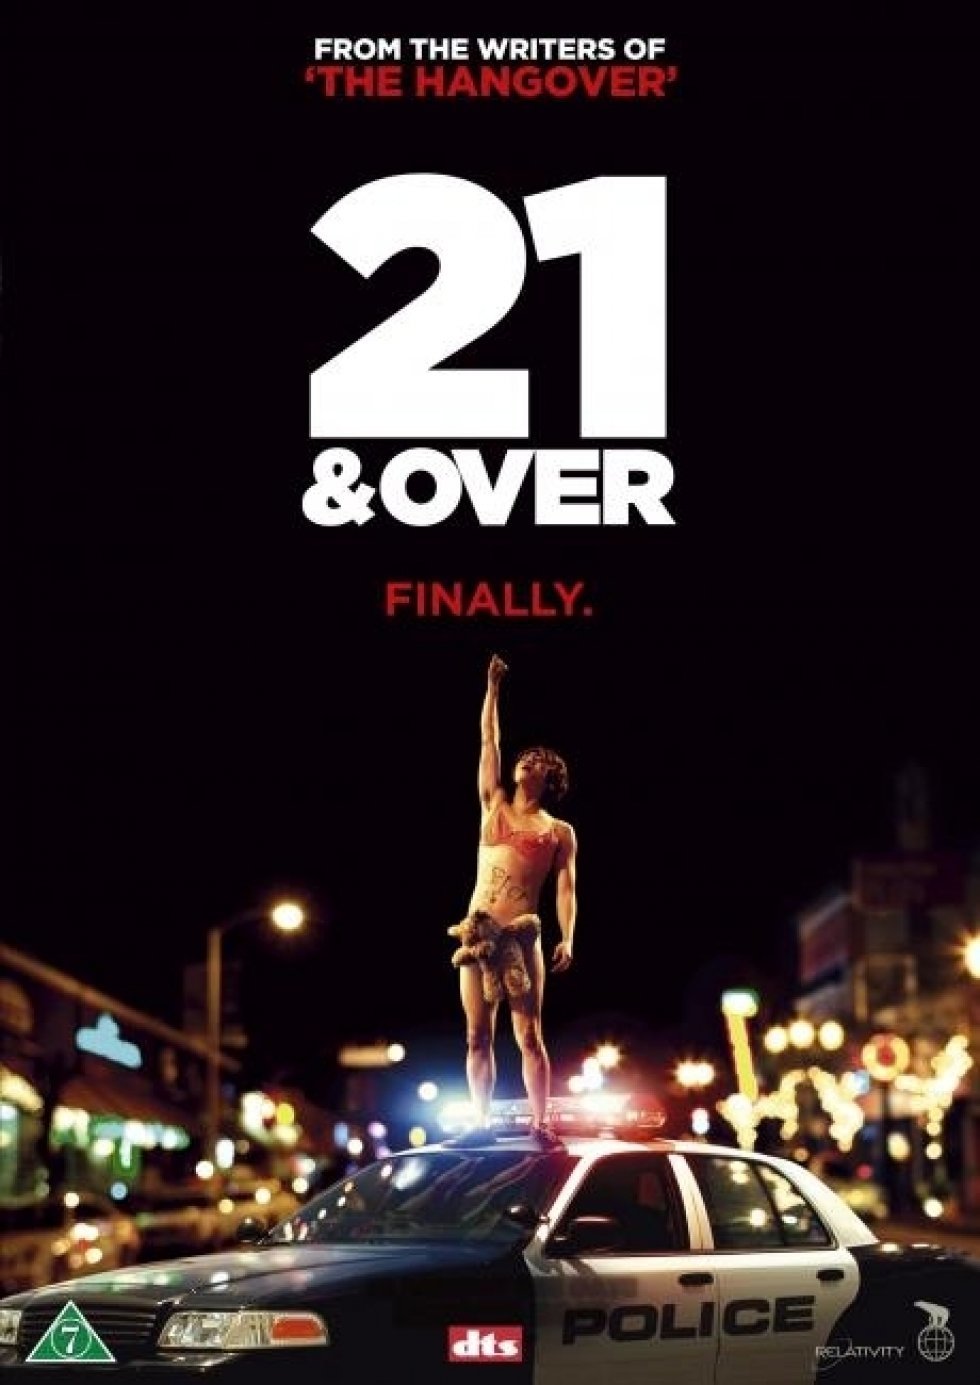 [Anmeldelse:] 21 and over